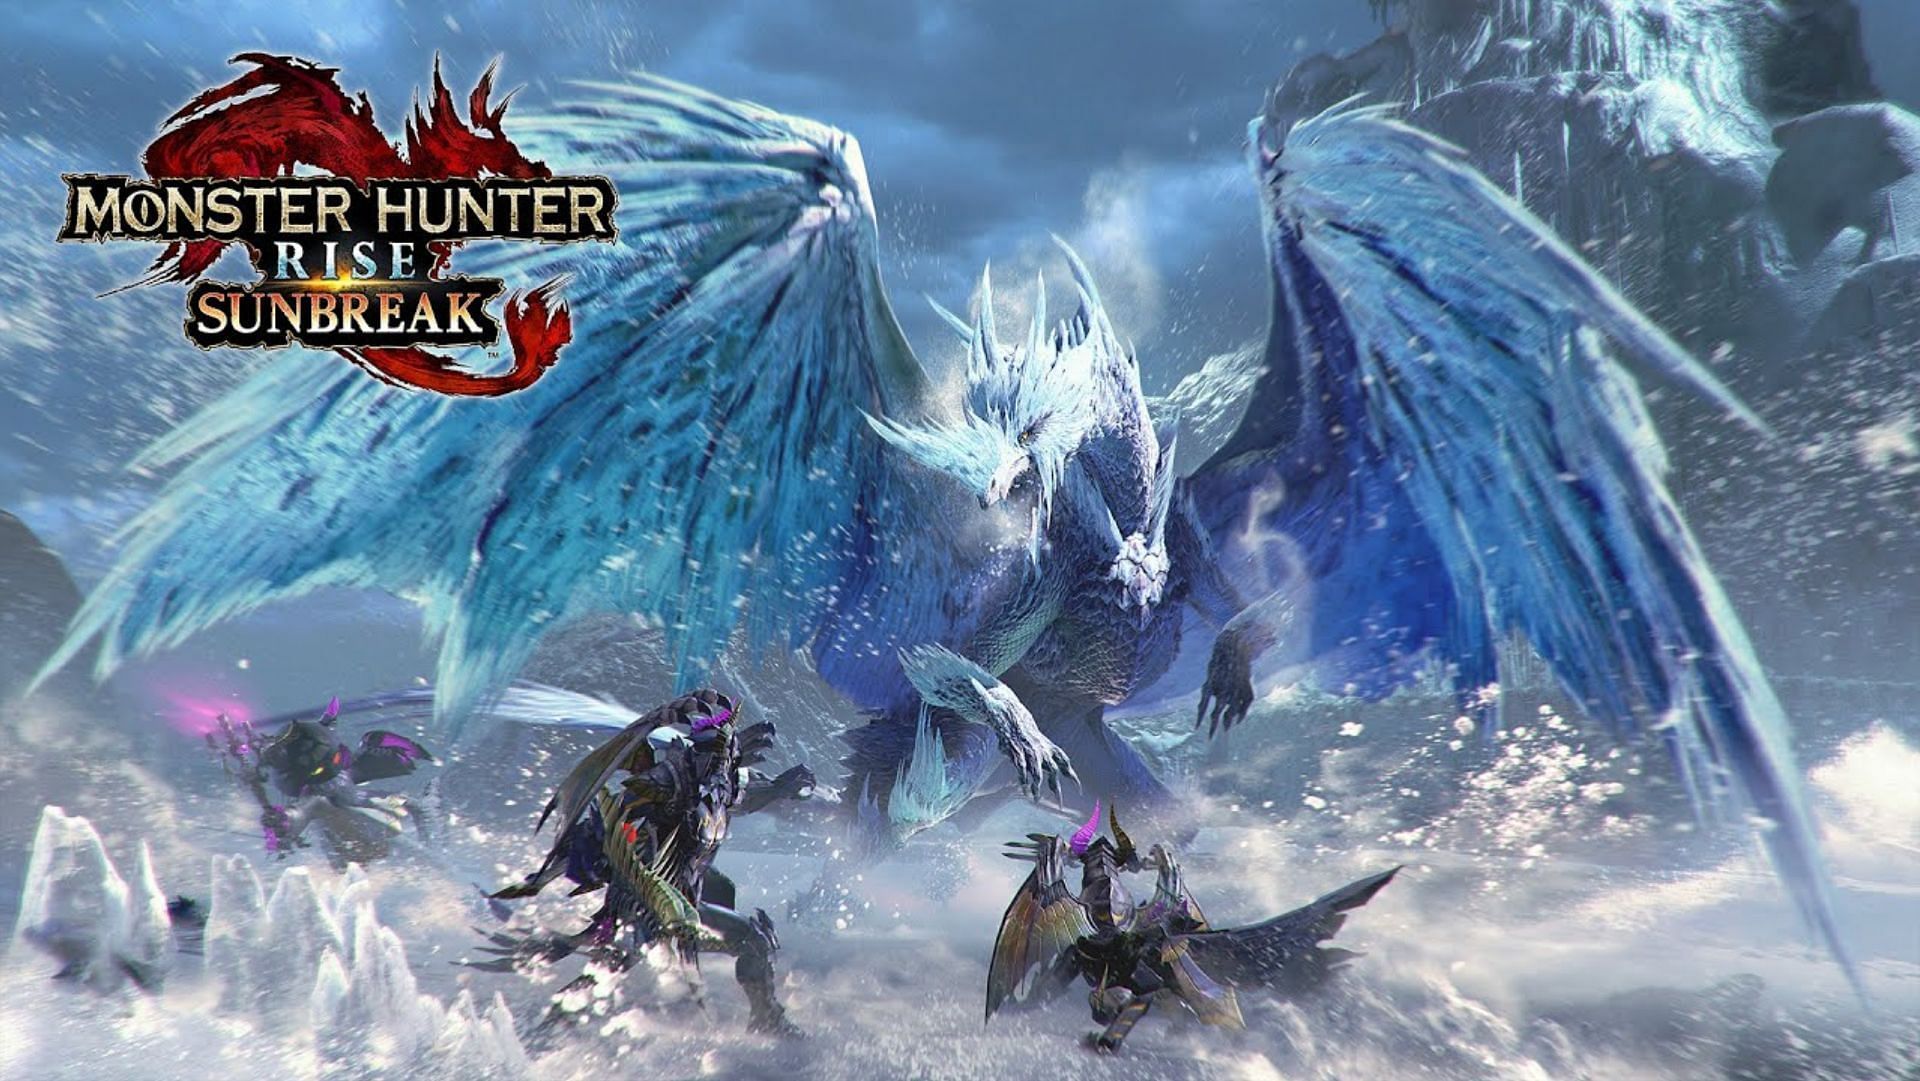 New Monsters And Locations Revealed For Monster Hunter Rise